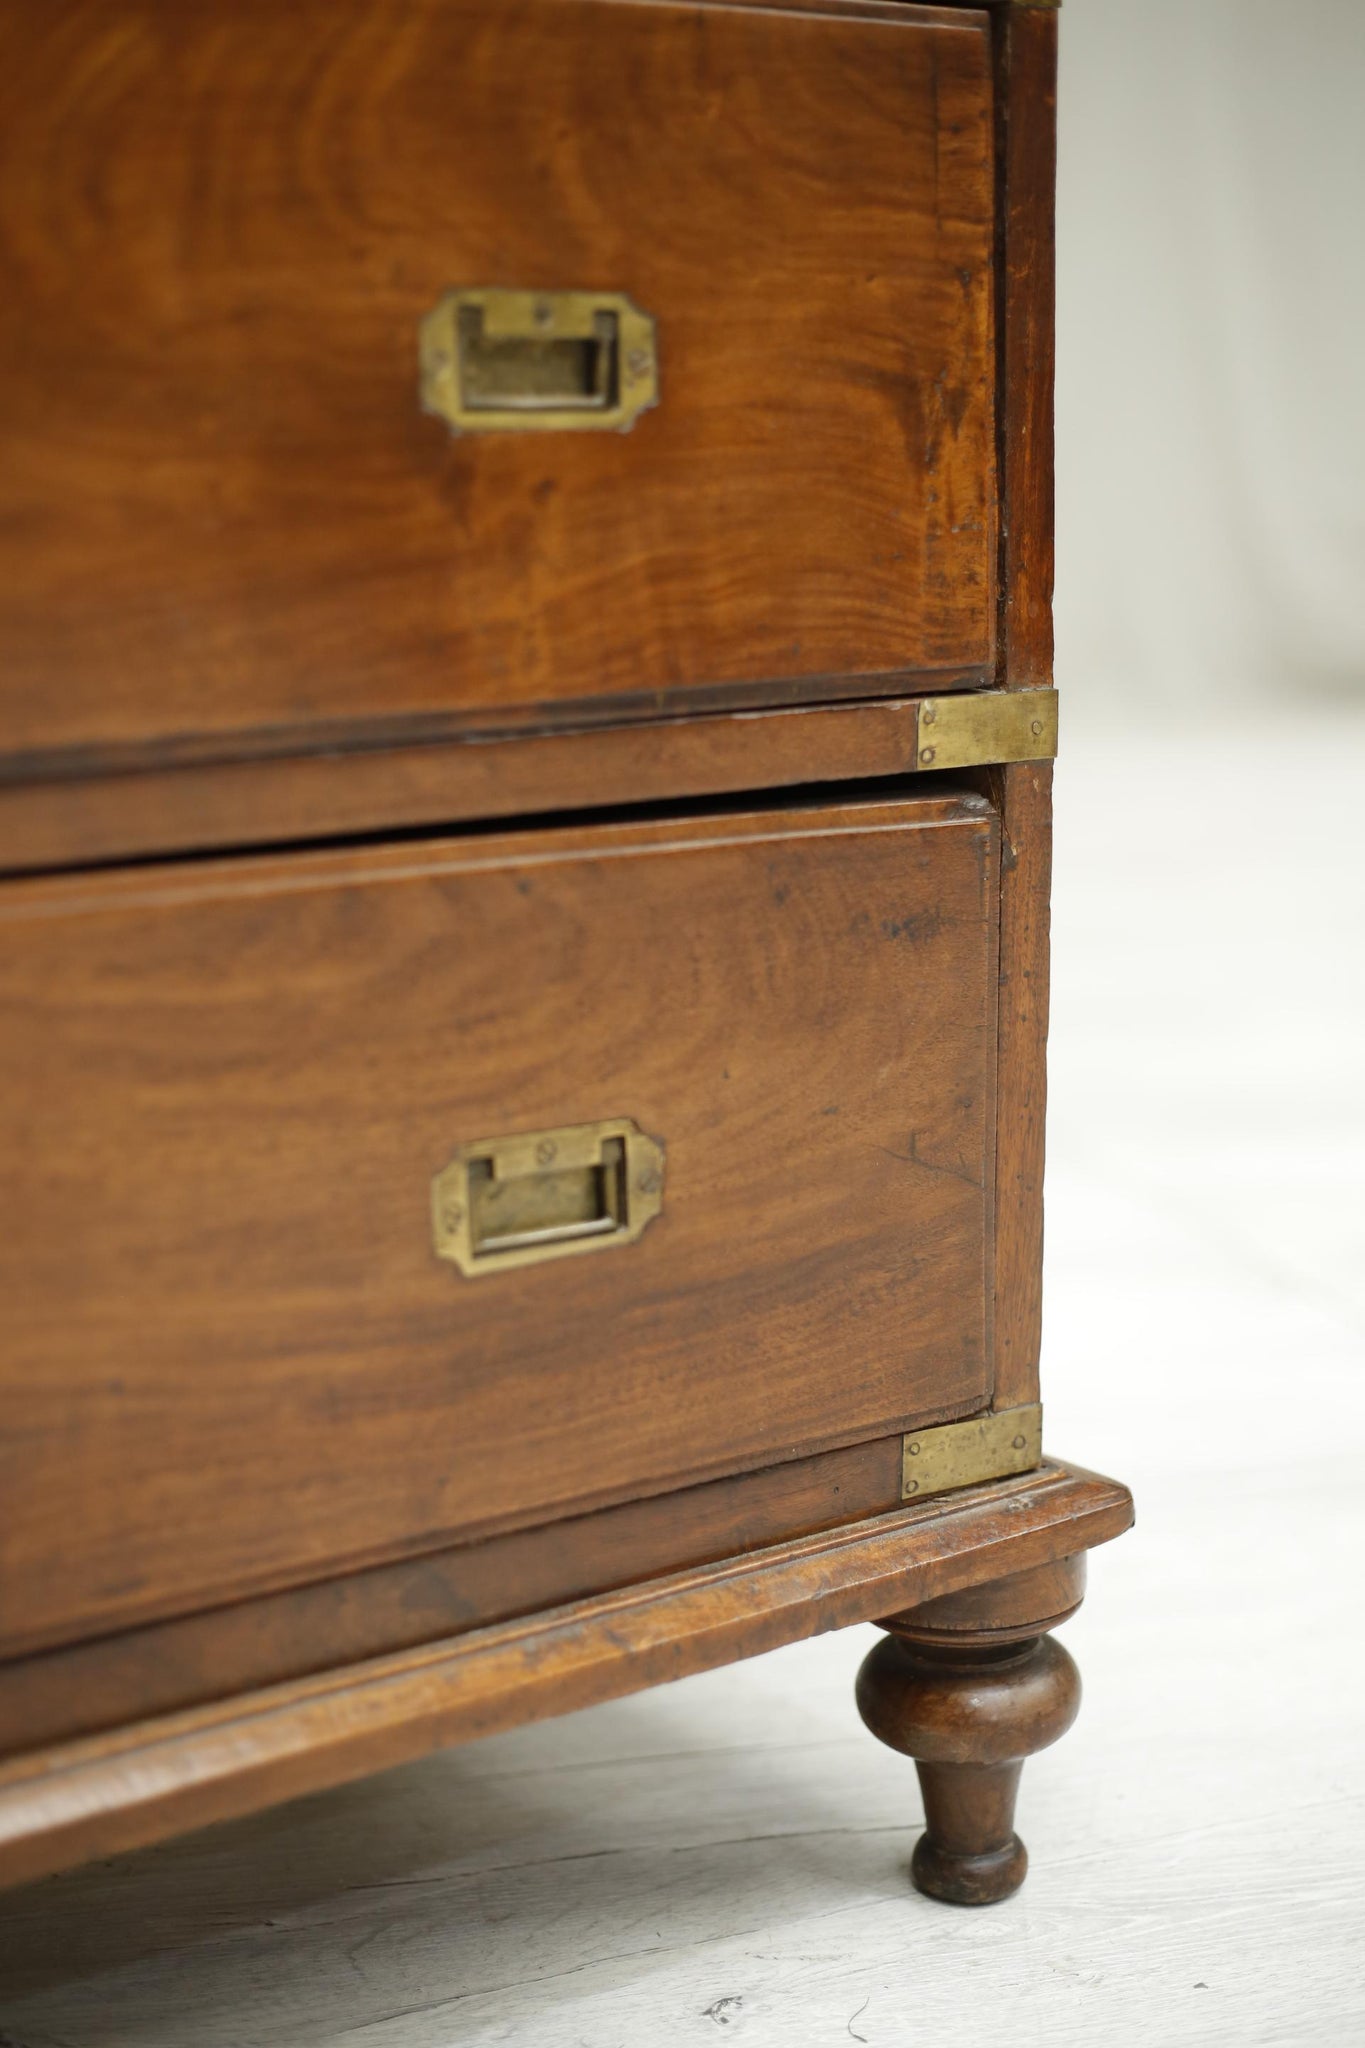 19th century Antique Anglo-Indian camphor wood campaign drawers - TallBoy Interiors